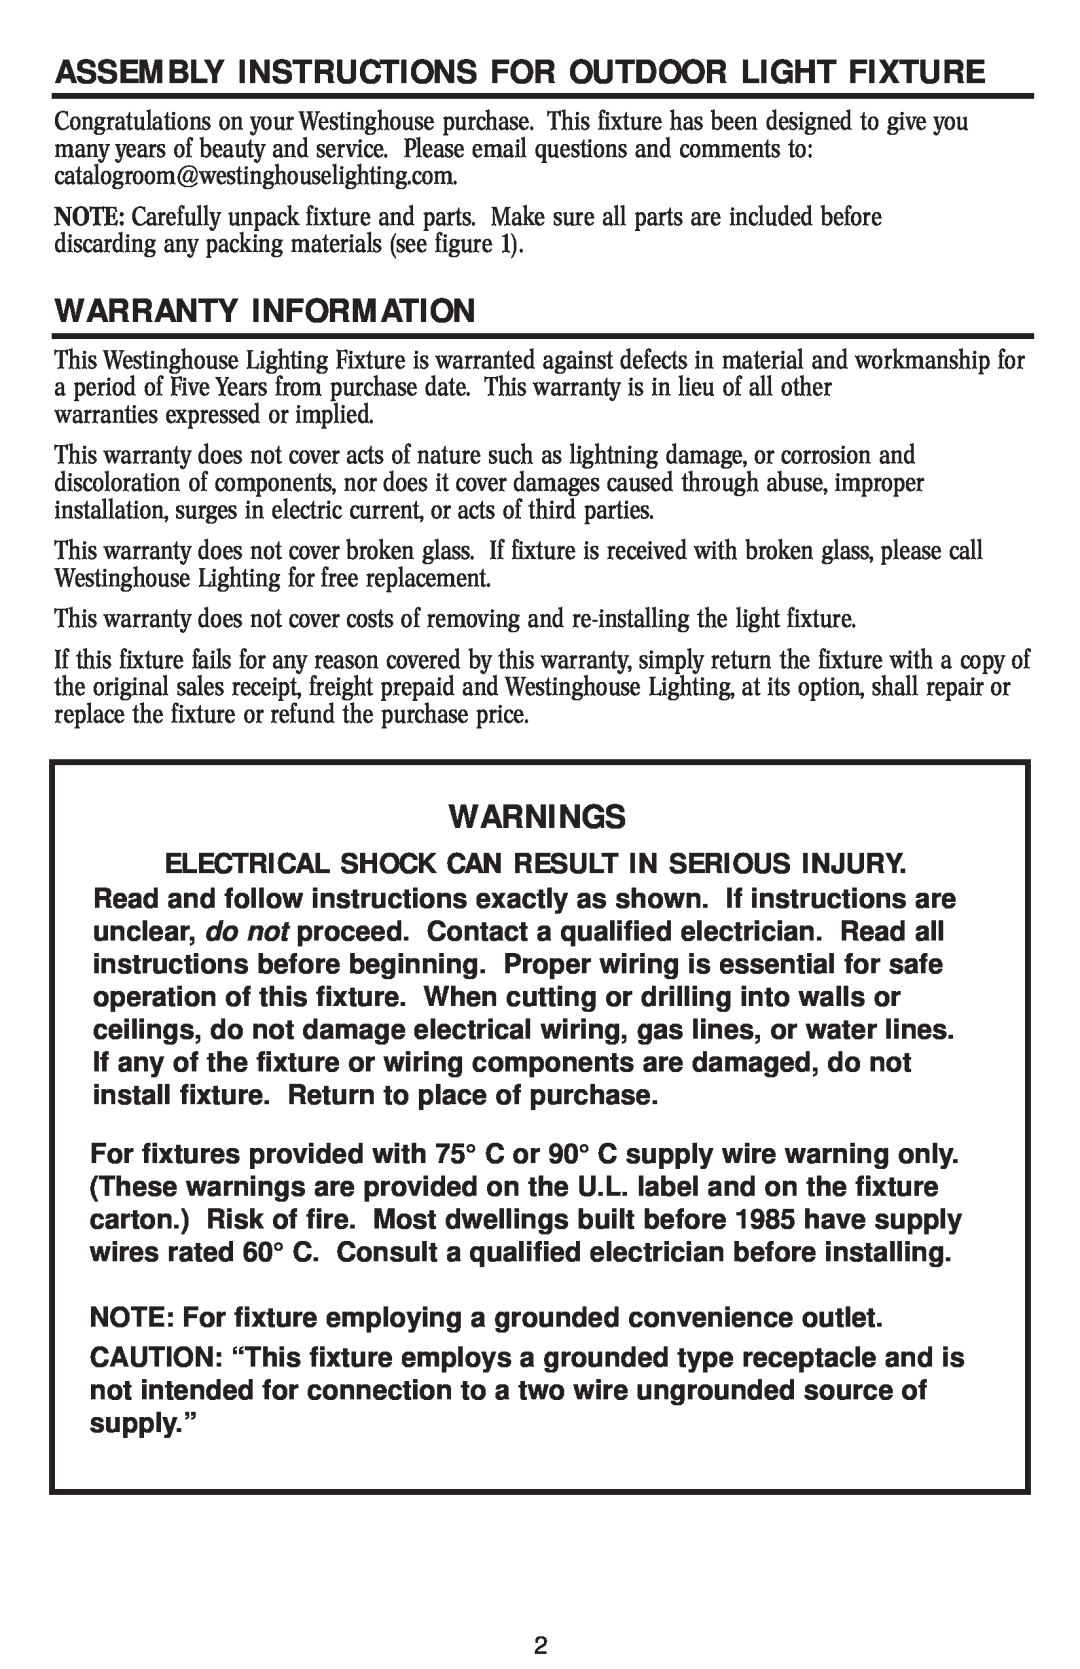 Westinghouse W-005 owner manual Warranty Information, Warnings, Assembly Instructions For Outdoor Light Fixture 